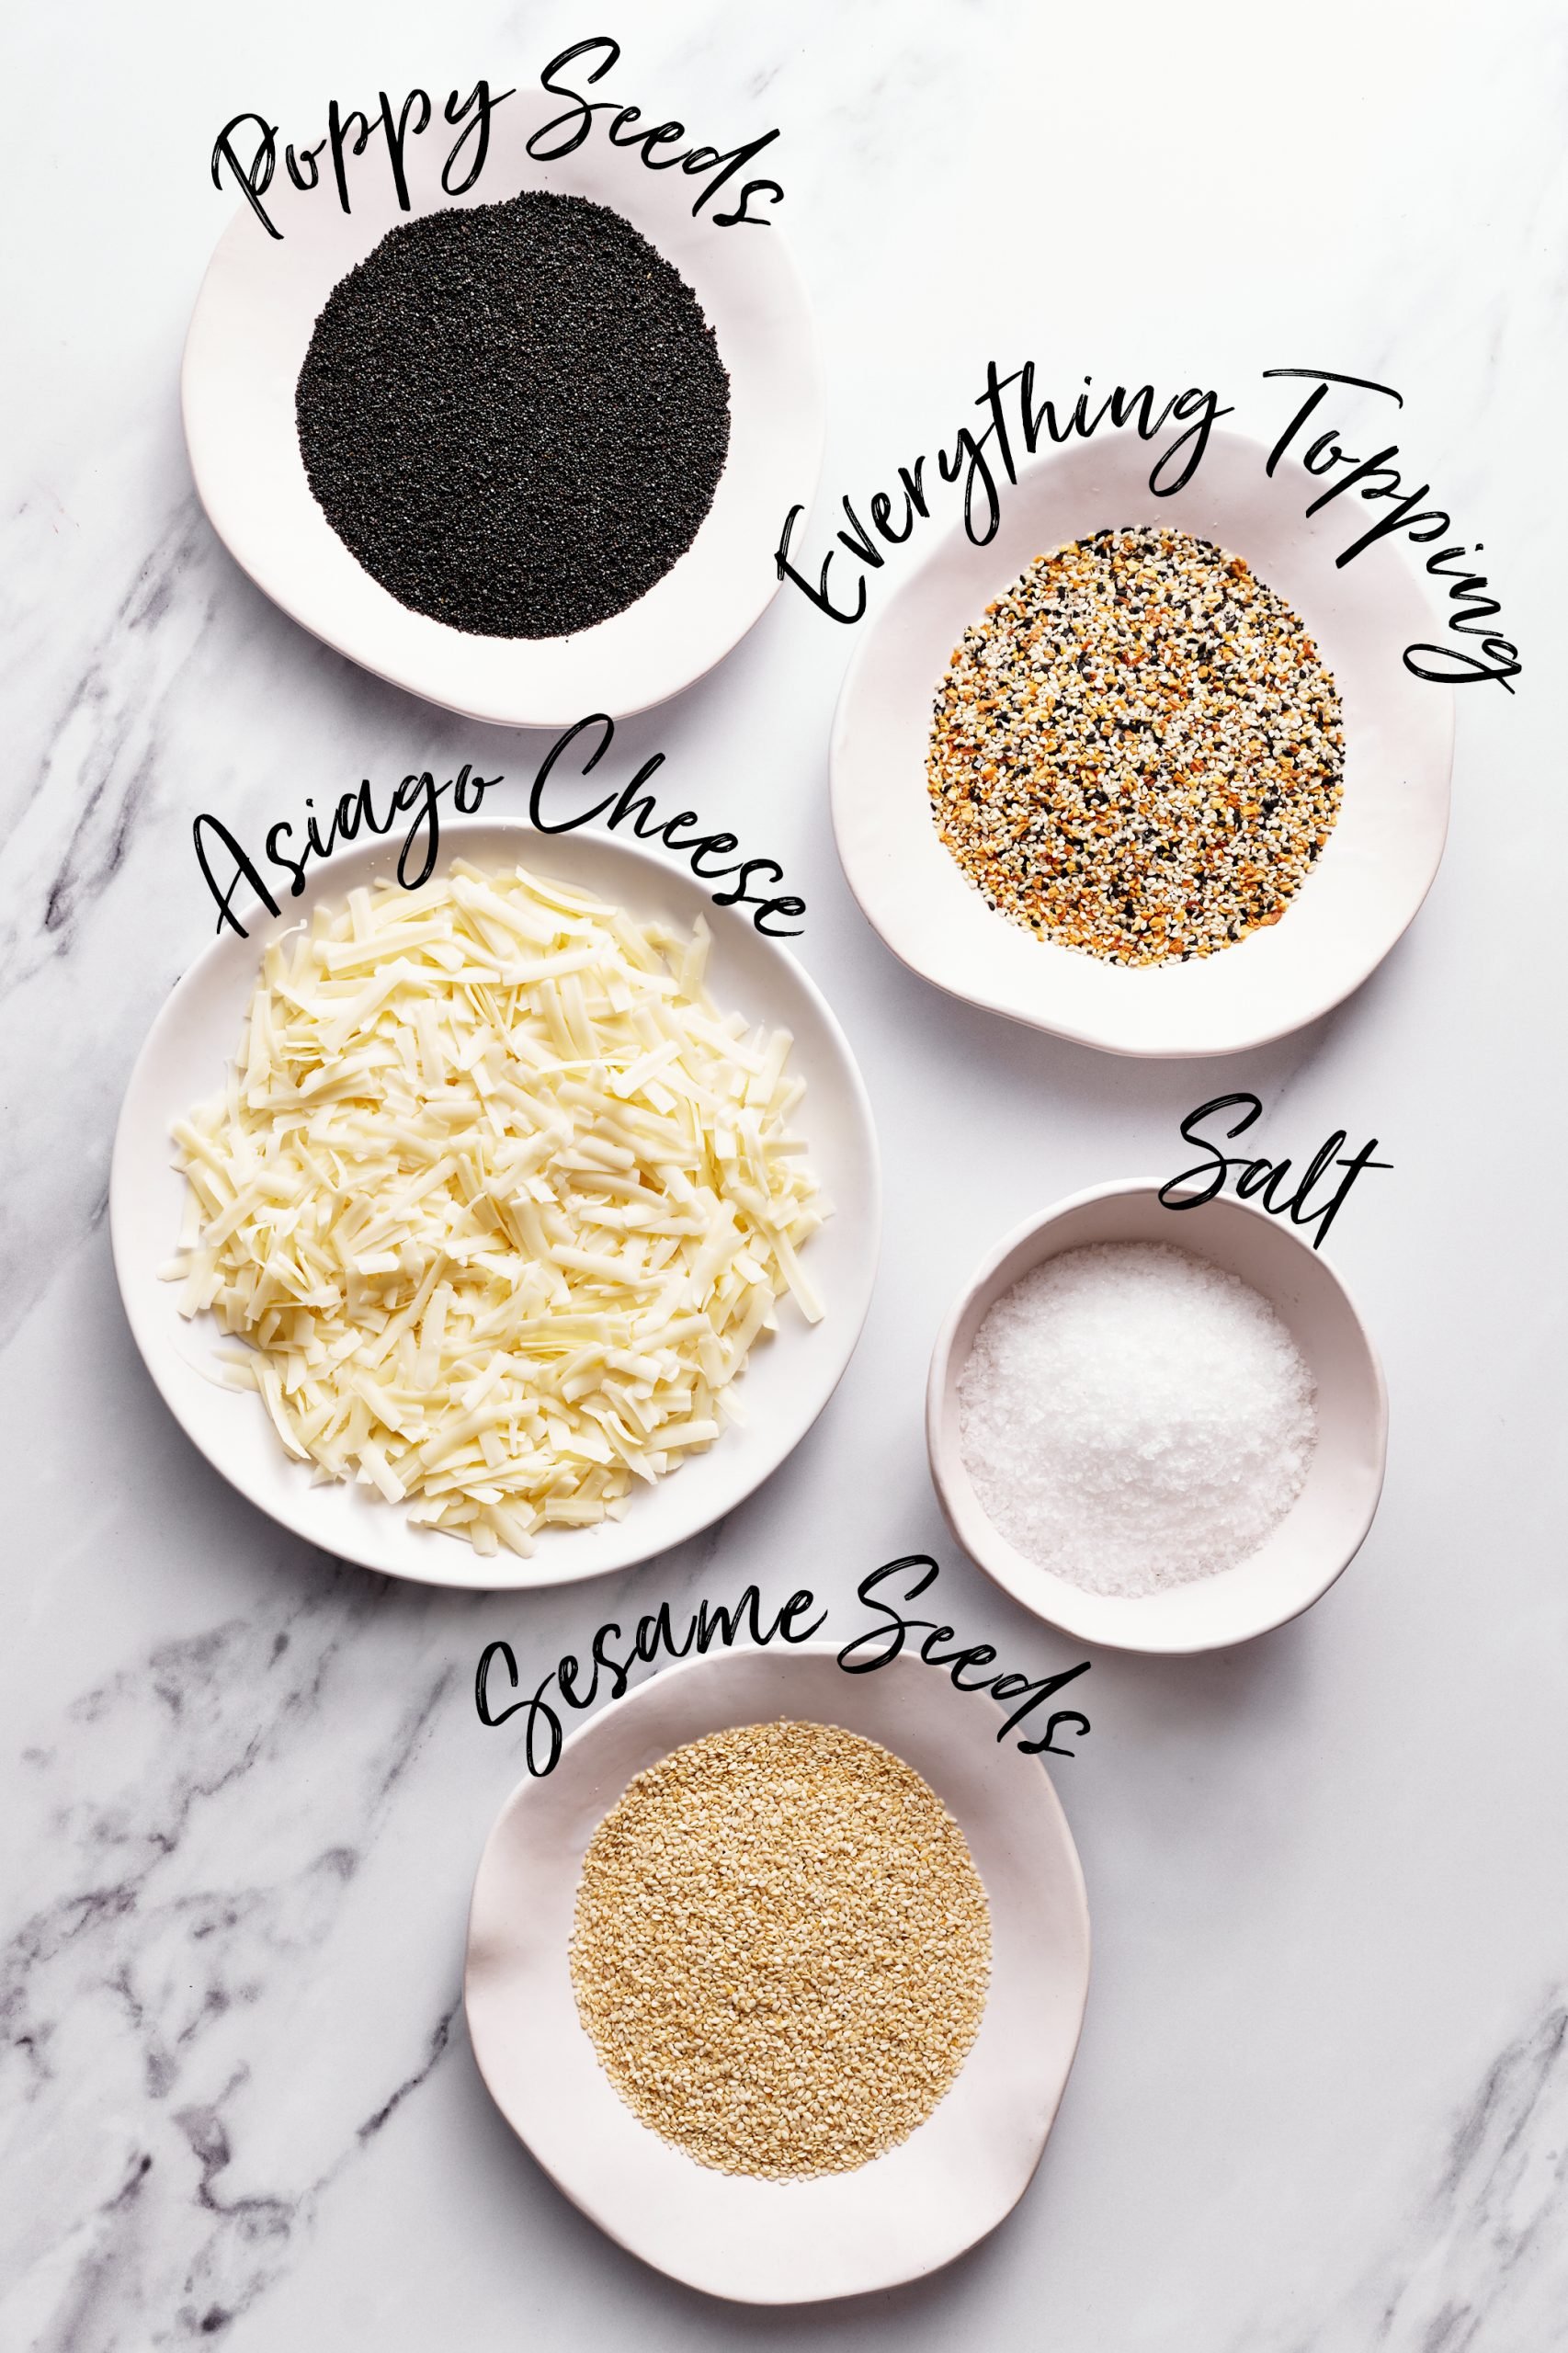 topping ideas include poppy seeds, everything topping, cheese, sesame seeds and salt